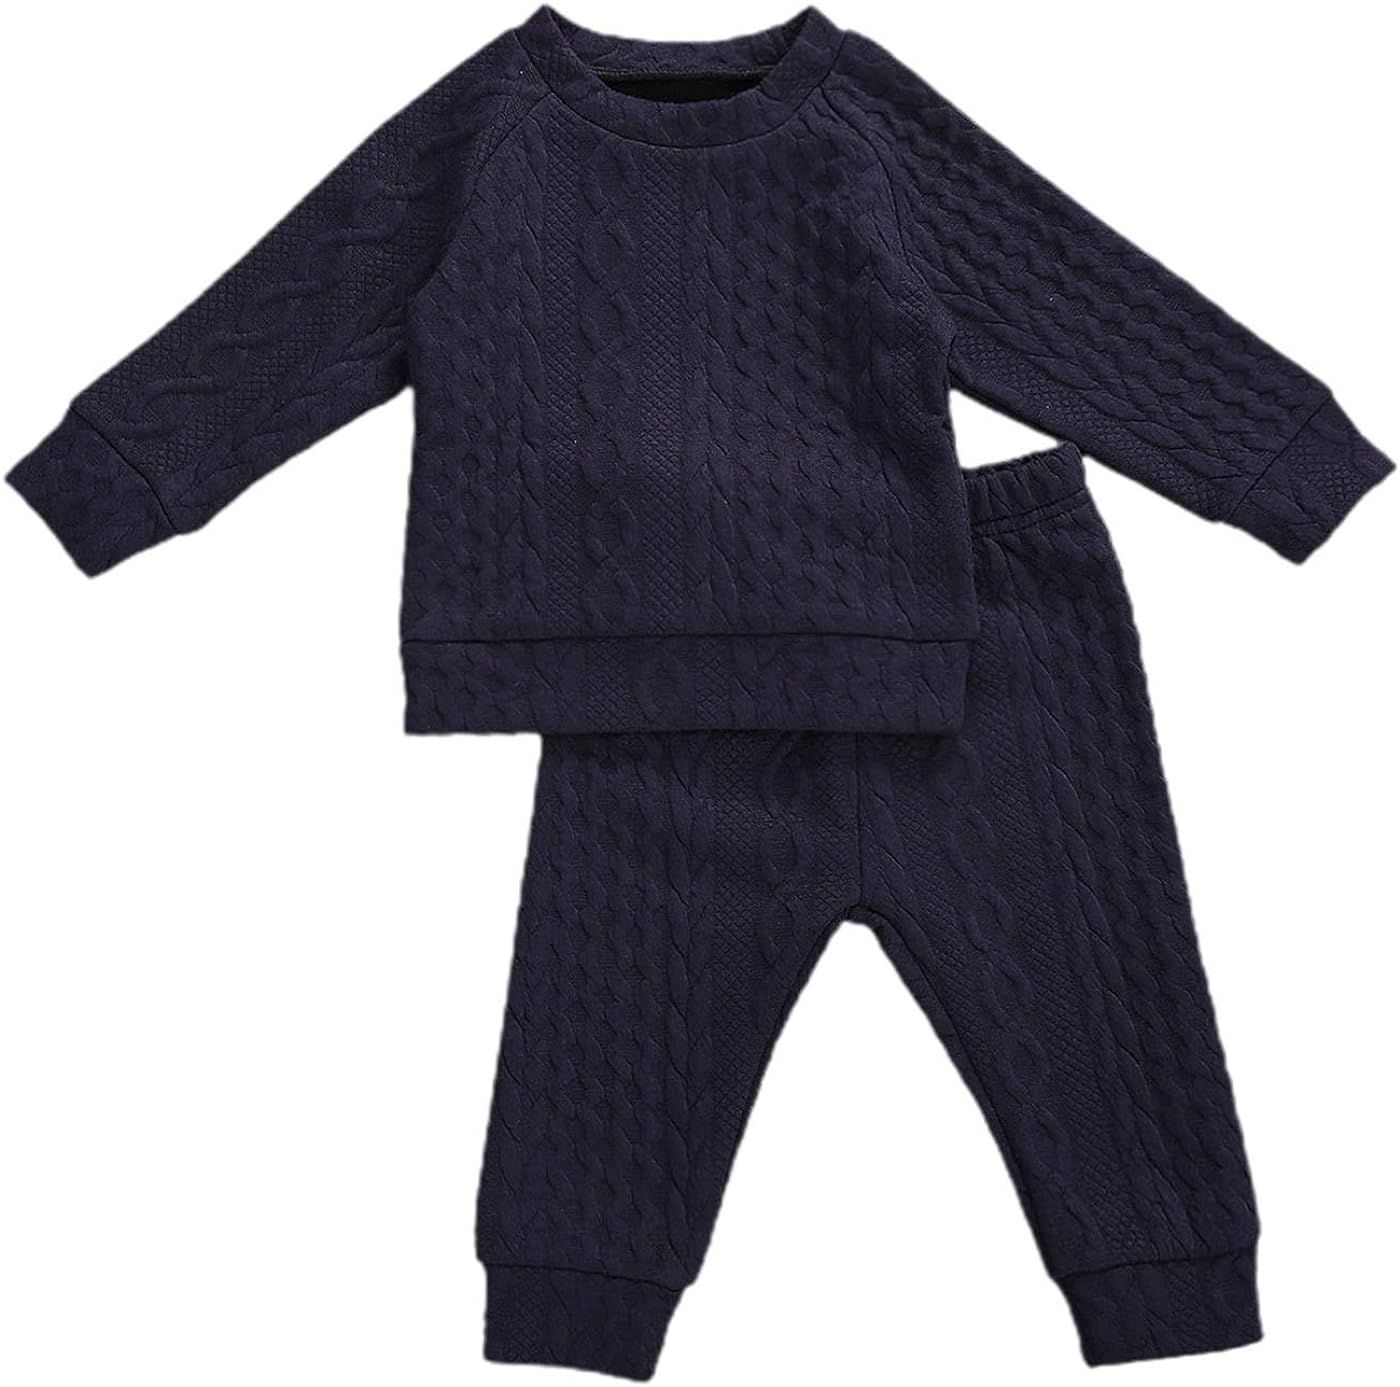 Qiylii Toddler Baby Girls Boys Twist Knit Sweater Shirt Top and Pants Cotton Warm Clothes Winter | Amazon (US)